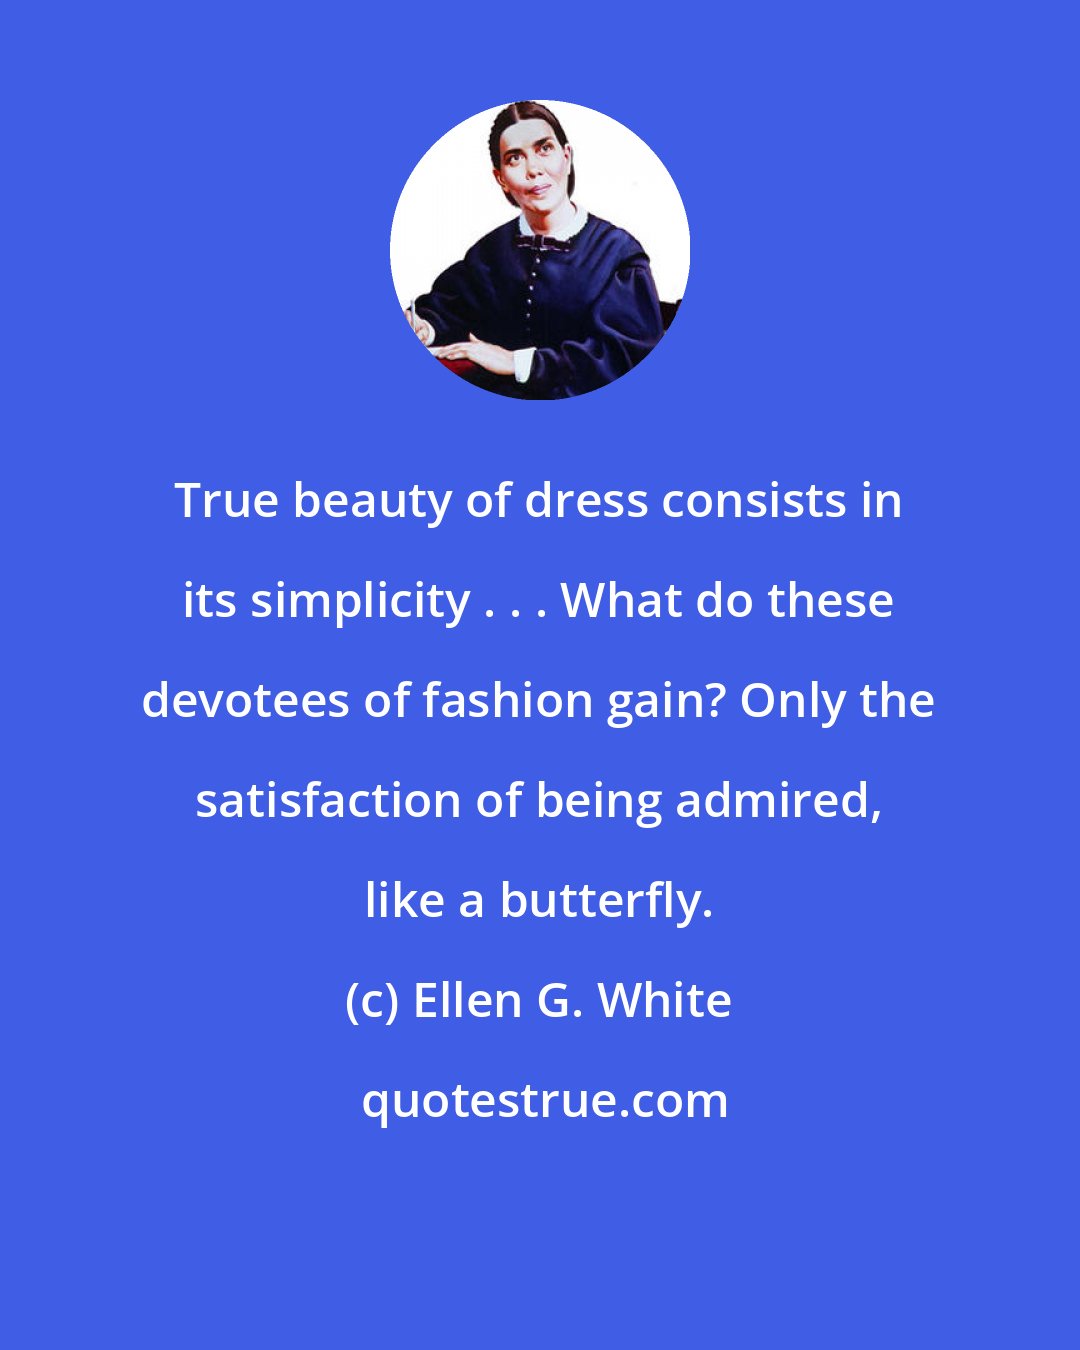 Ellen G. White: True beauty of dress consists in its simplicity . . . What do these devotees of fashion gain? Only the satisfaction of being admired, like a butterfly.